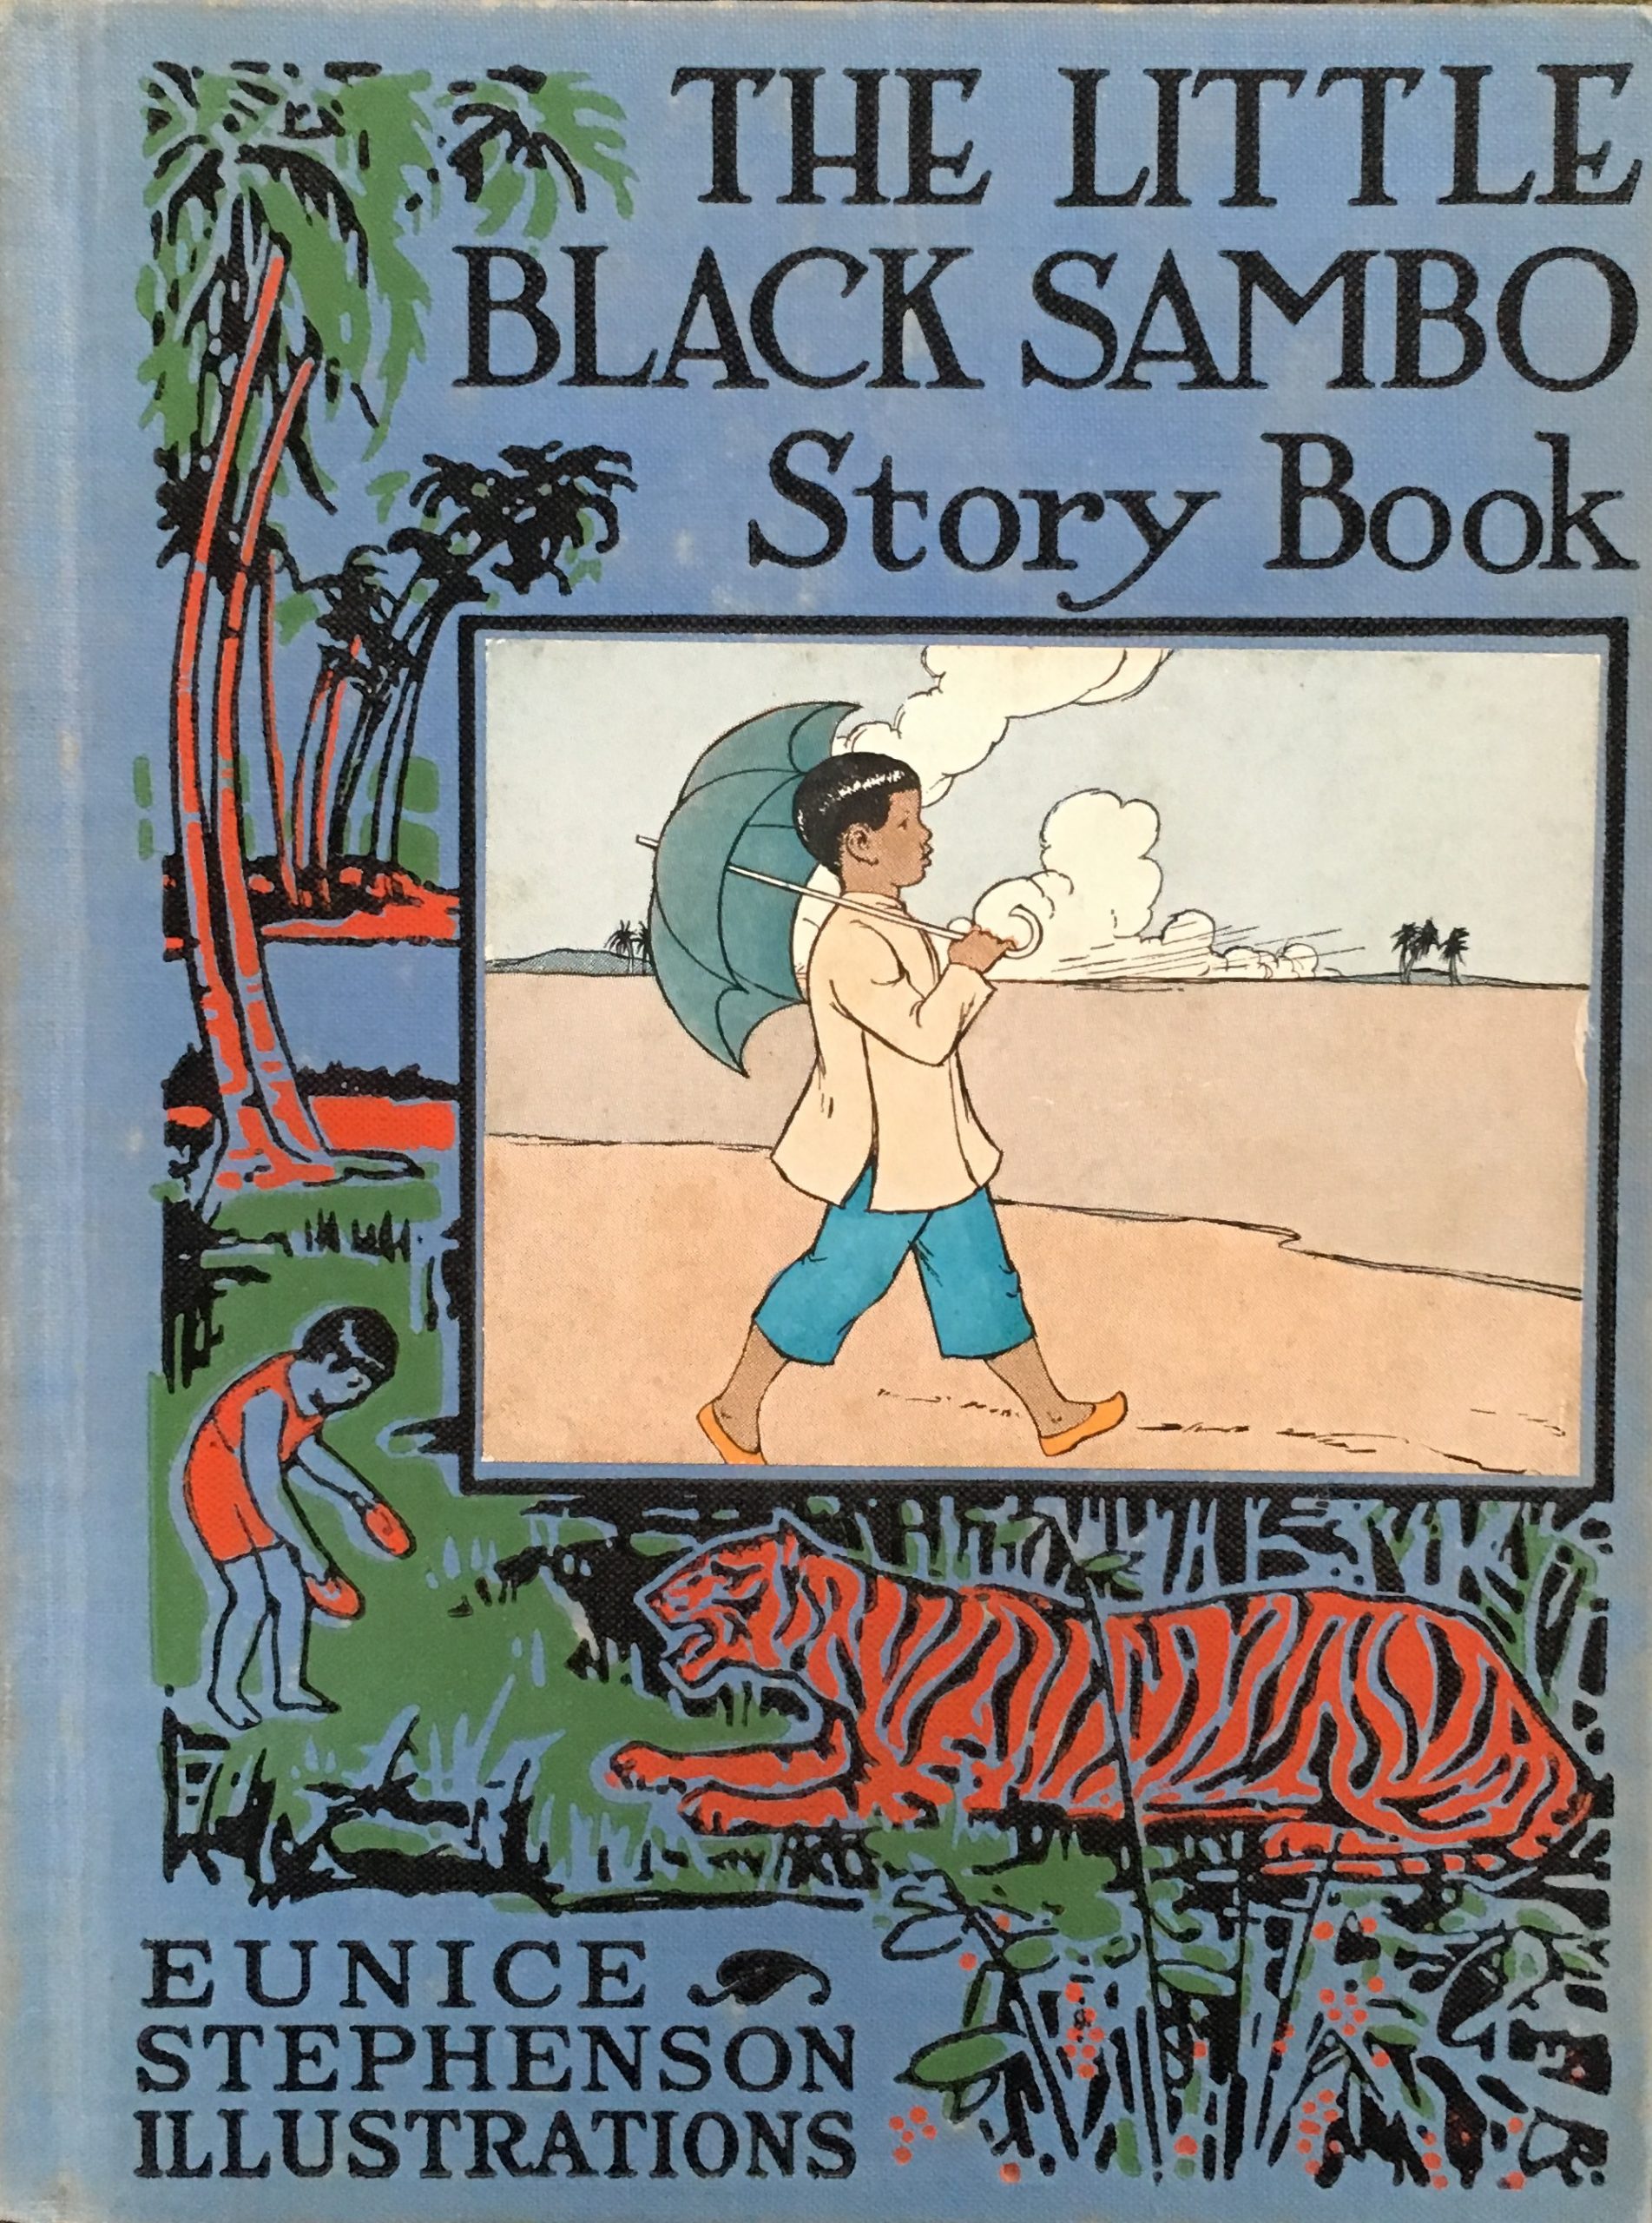 Cover of "The Little Black Sambo Story Book"